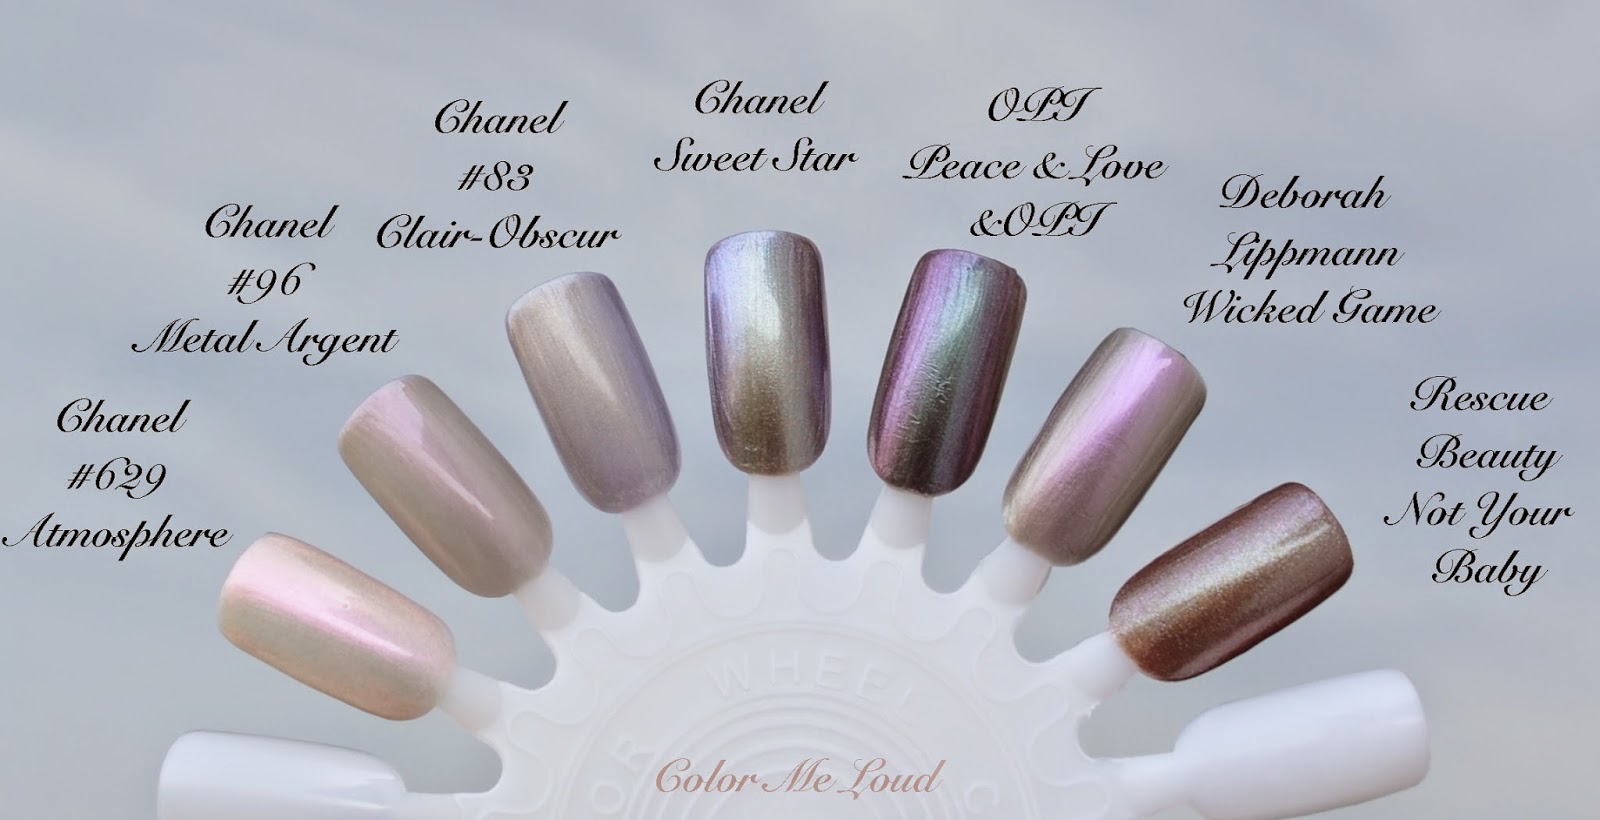 Chanel Le Vernis Sweet Star for Fashion Night Out 2014 Nail Polishes,  Review, Swatch & Comparison